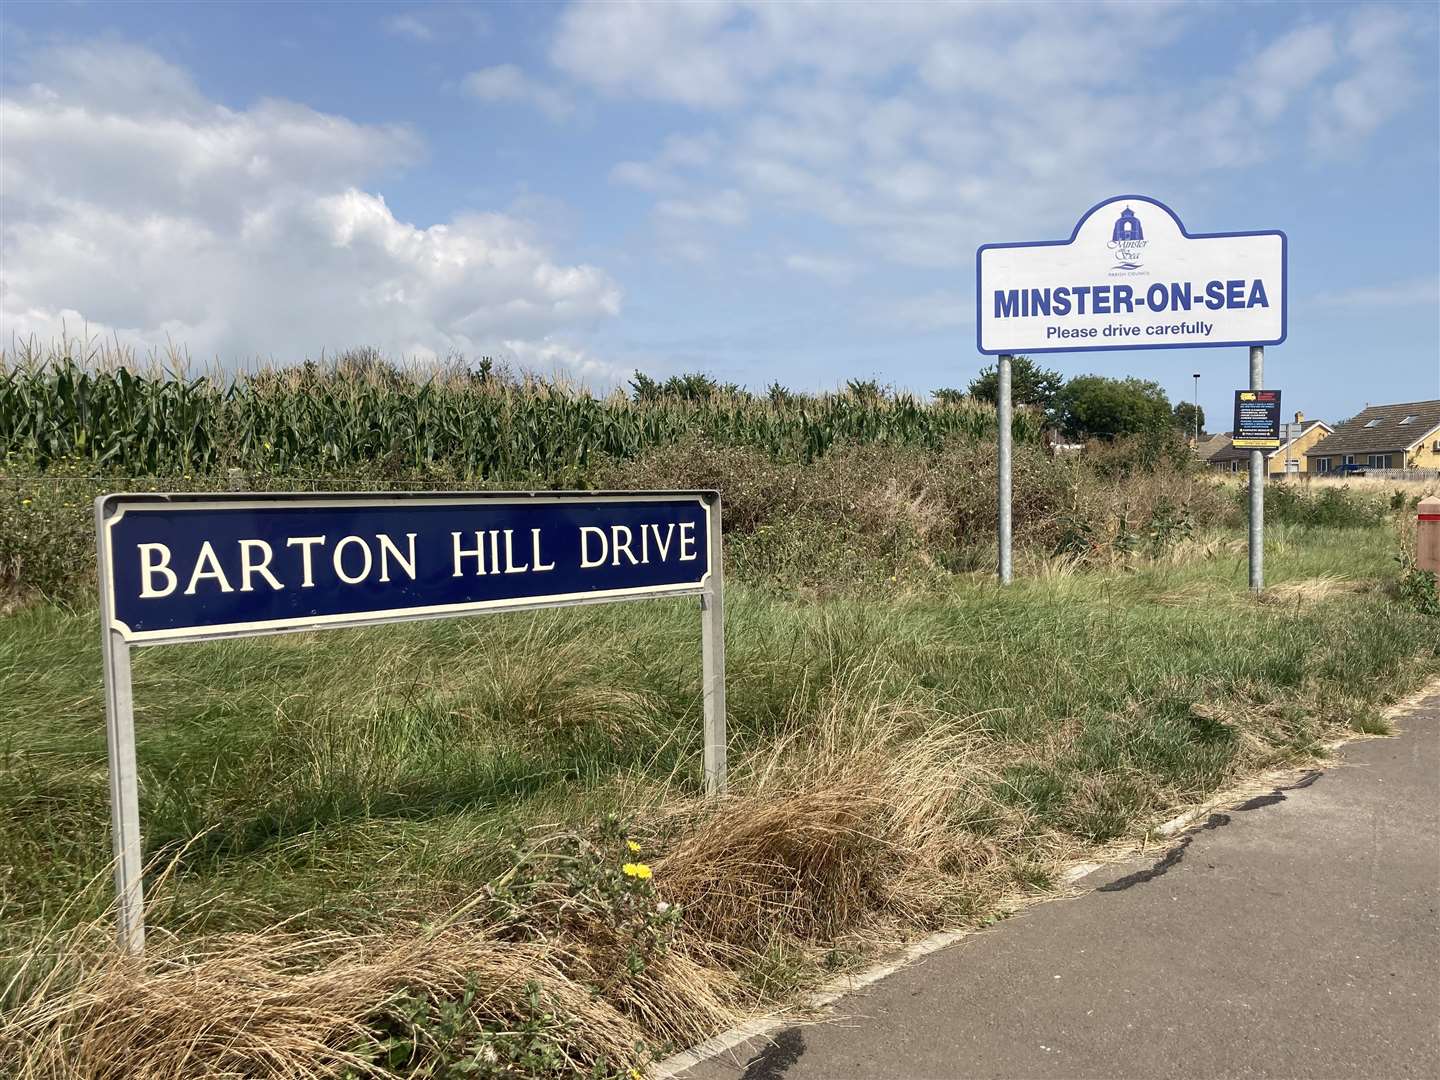 Seven hundred homes are planned for cornfields alongside the Lower Road and Barton Hill Drive at Minster, Sheppey